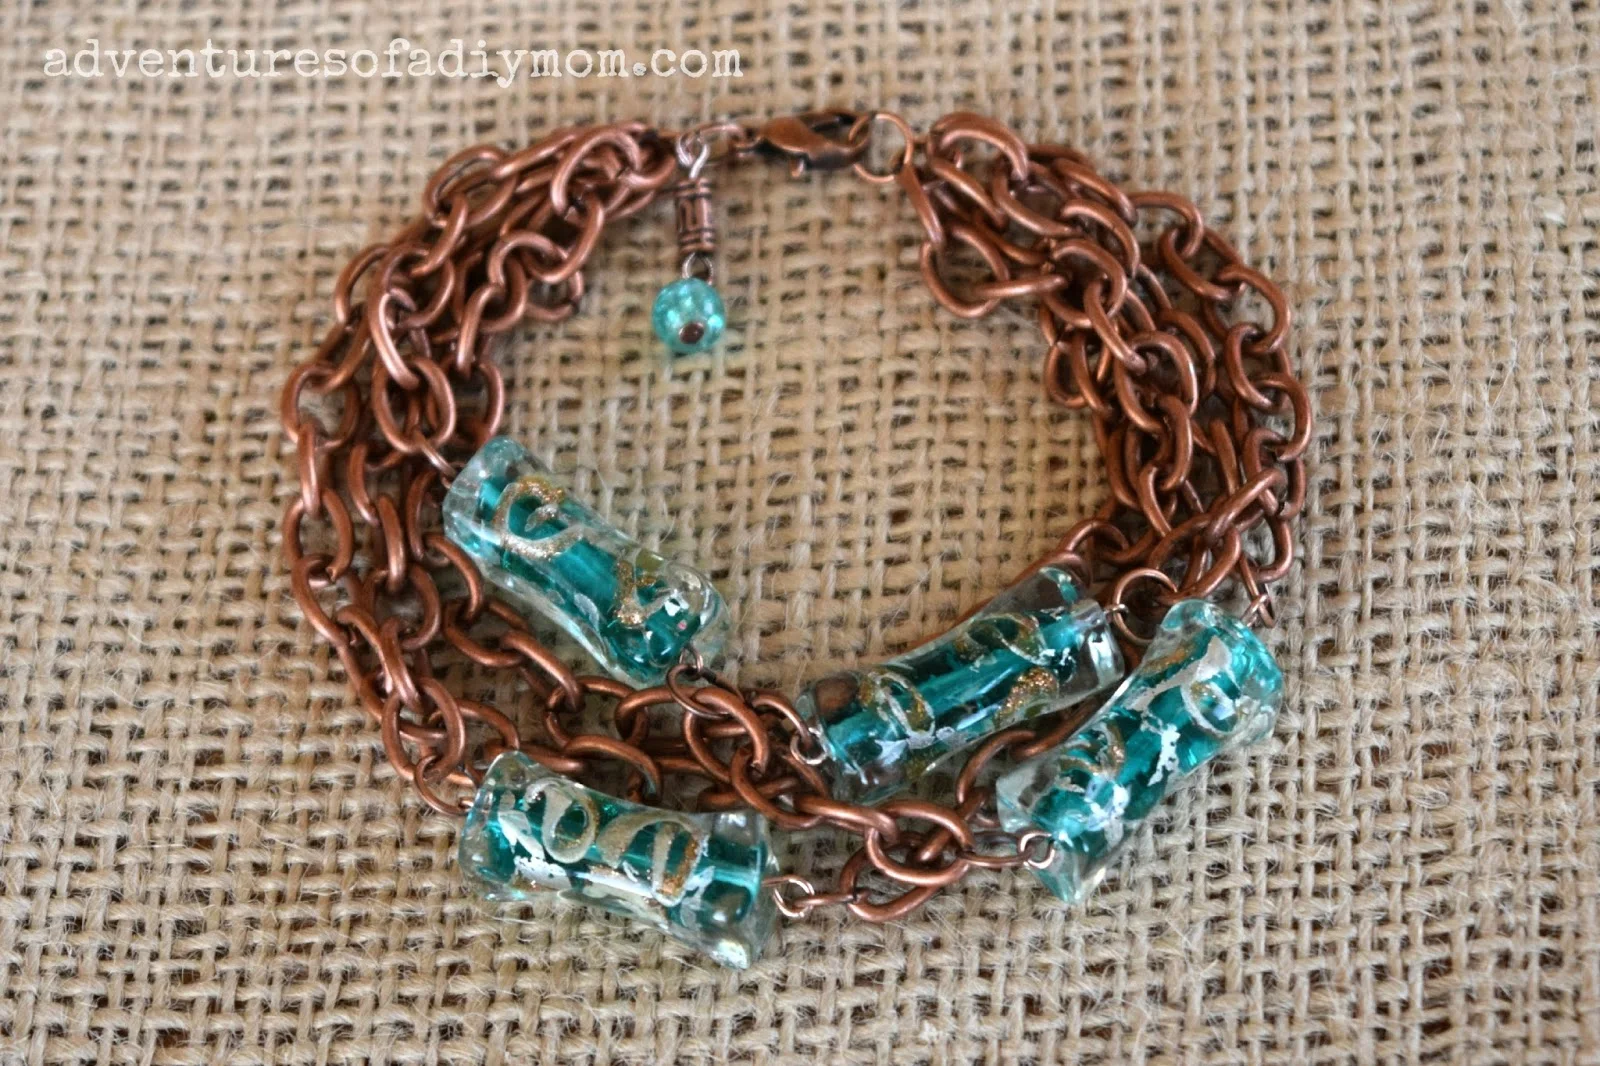 Turquoise and Copper Bracelet